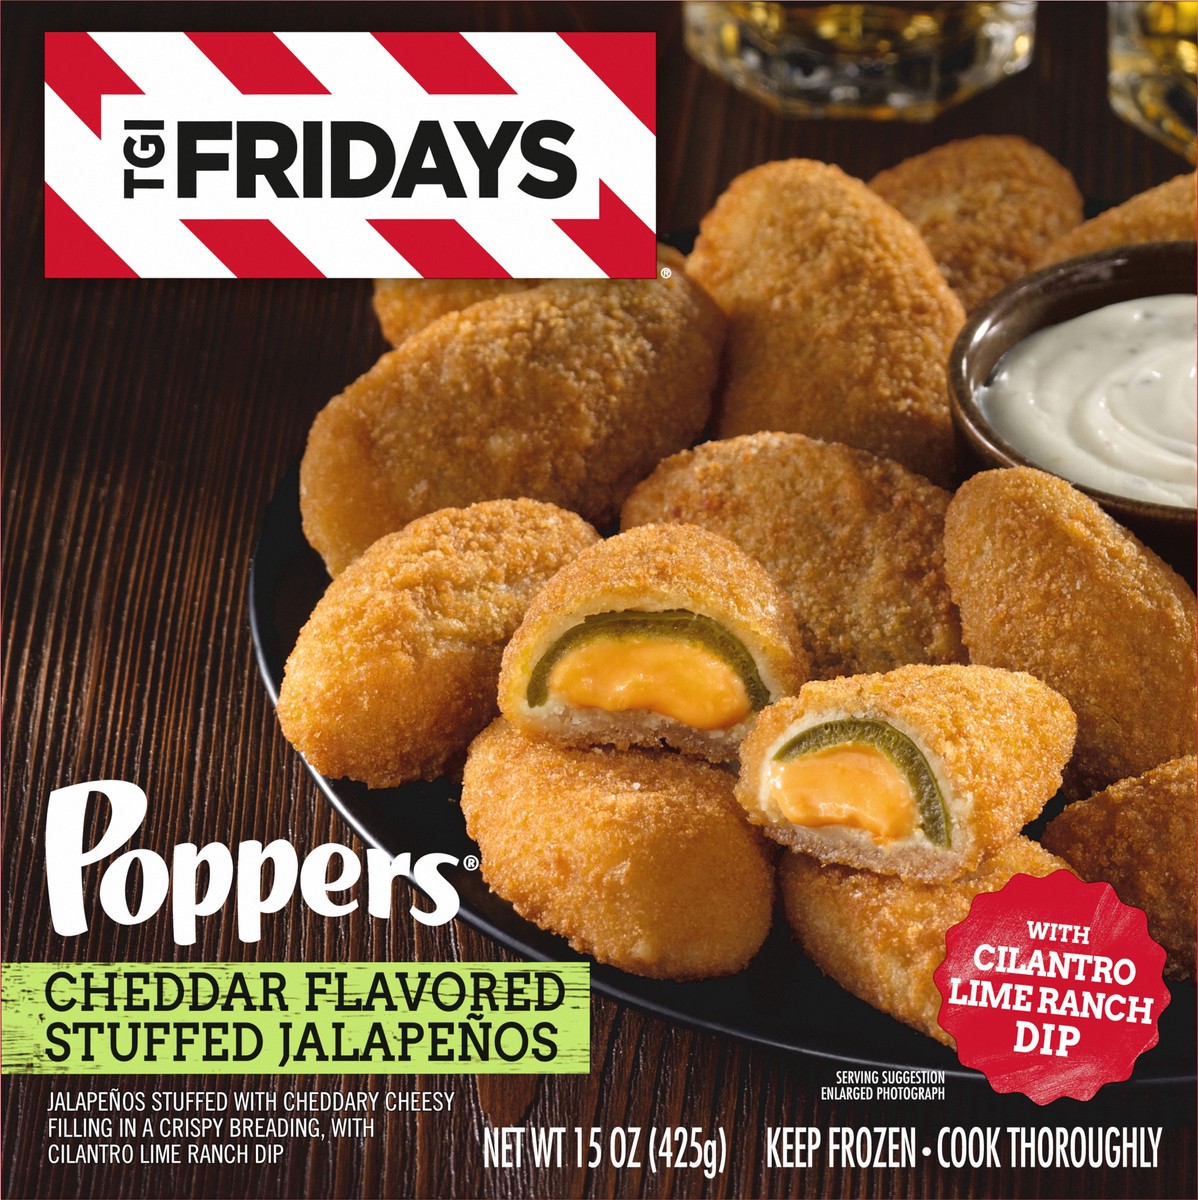 slide 3 of 9, T.G.I. Fridays TGI Fridays Frozen Appetizers Cheddar Cheese Stuffed Jalapeno Poppers with Cilantro Lime Ranch Dip, 15 oz. Box, 15 oz